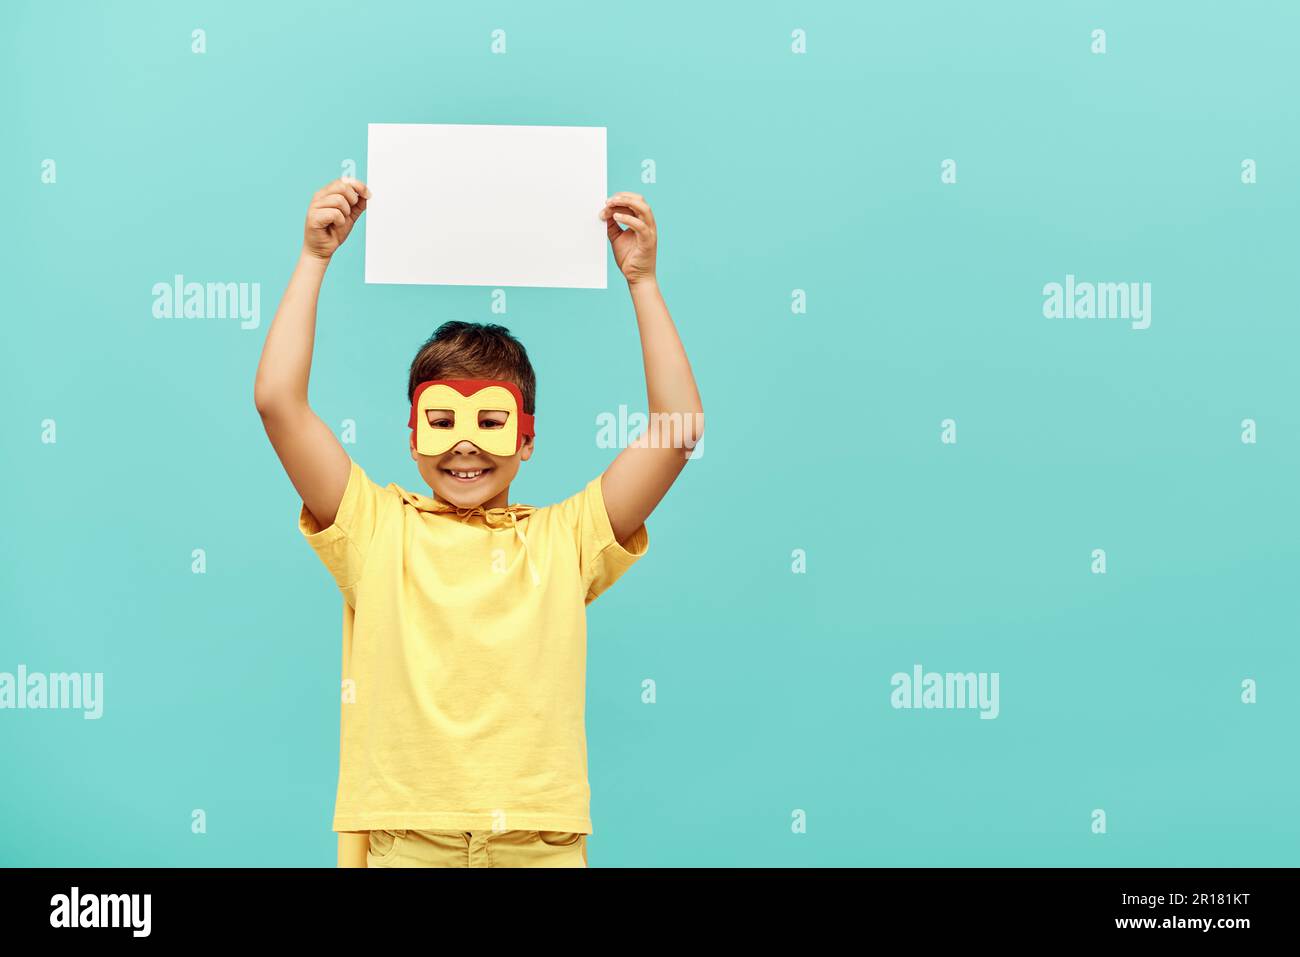 smiling multiracial boy in yellow superhero costume with mask holding blank paper above head on blue background, International children's day concept Stock Photo